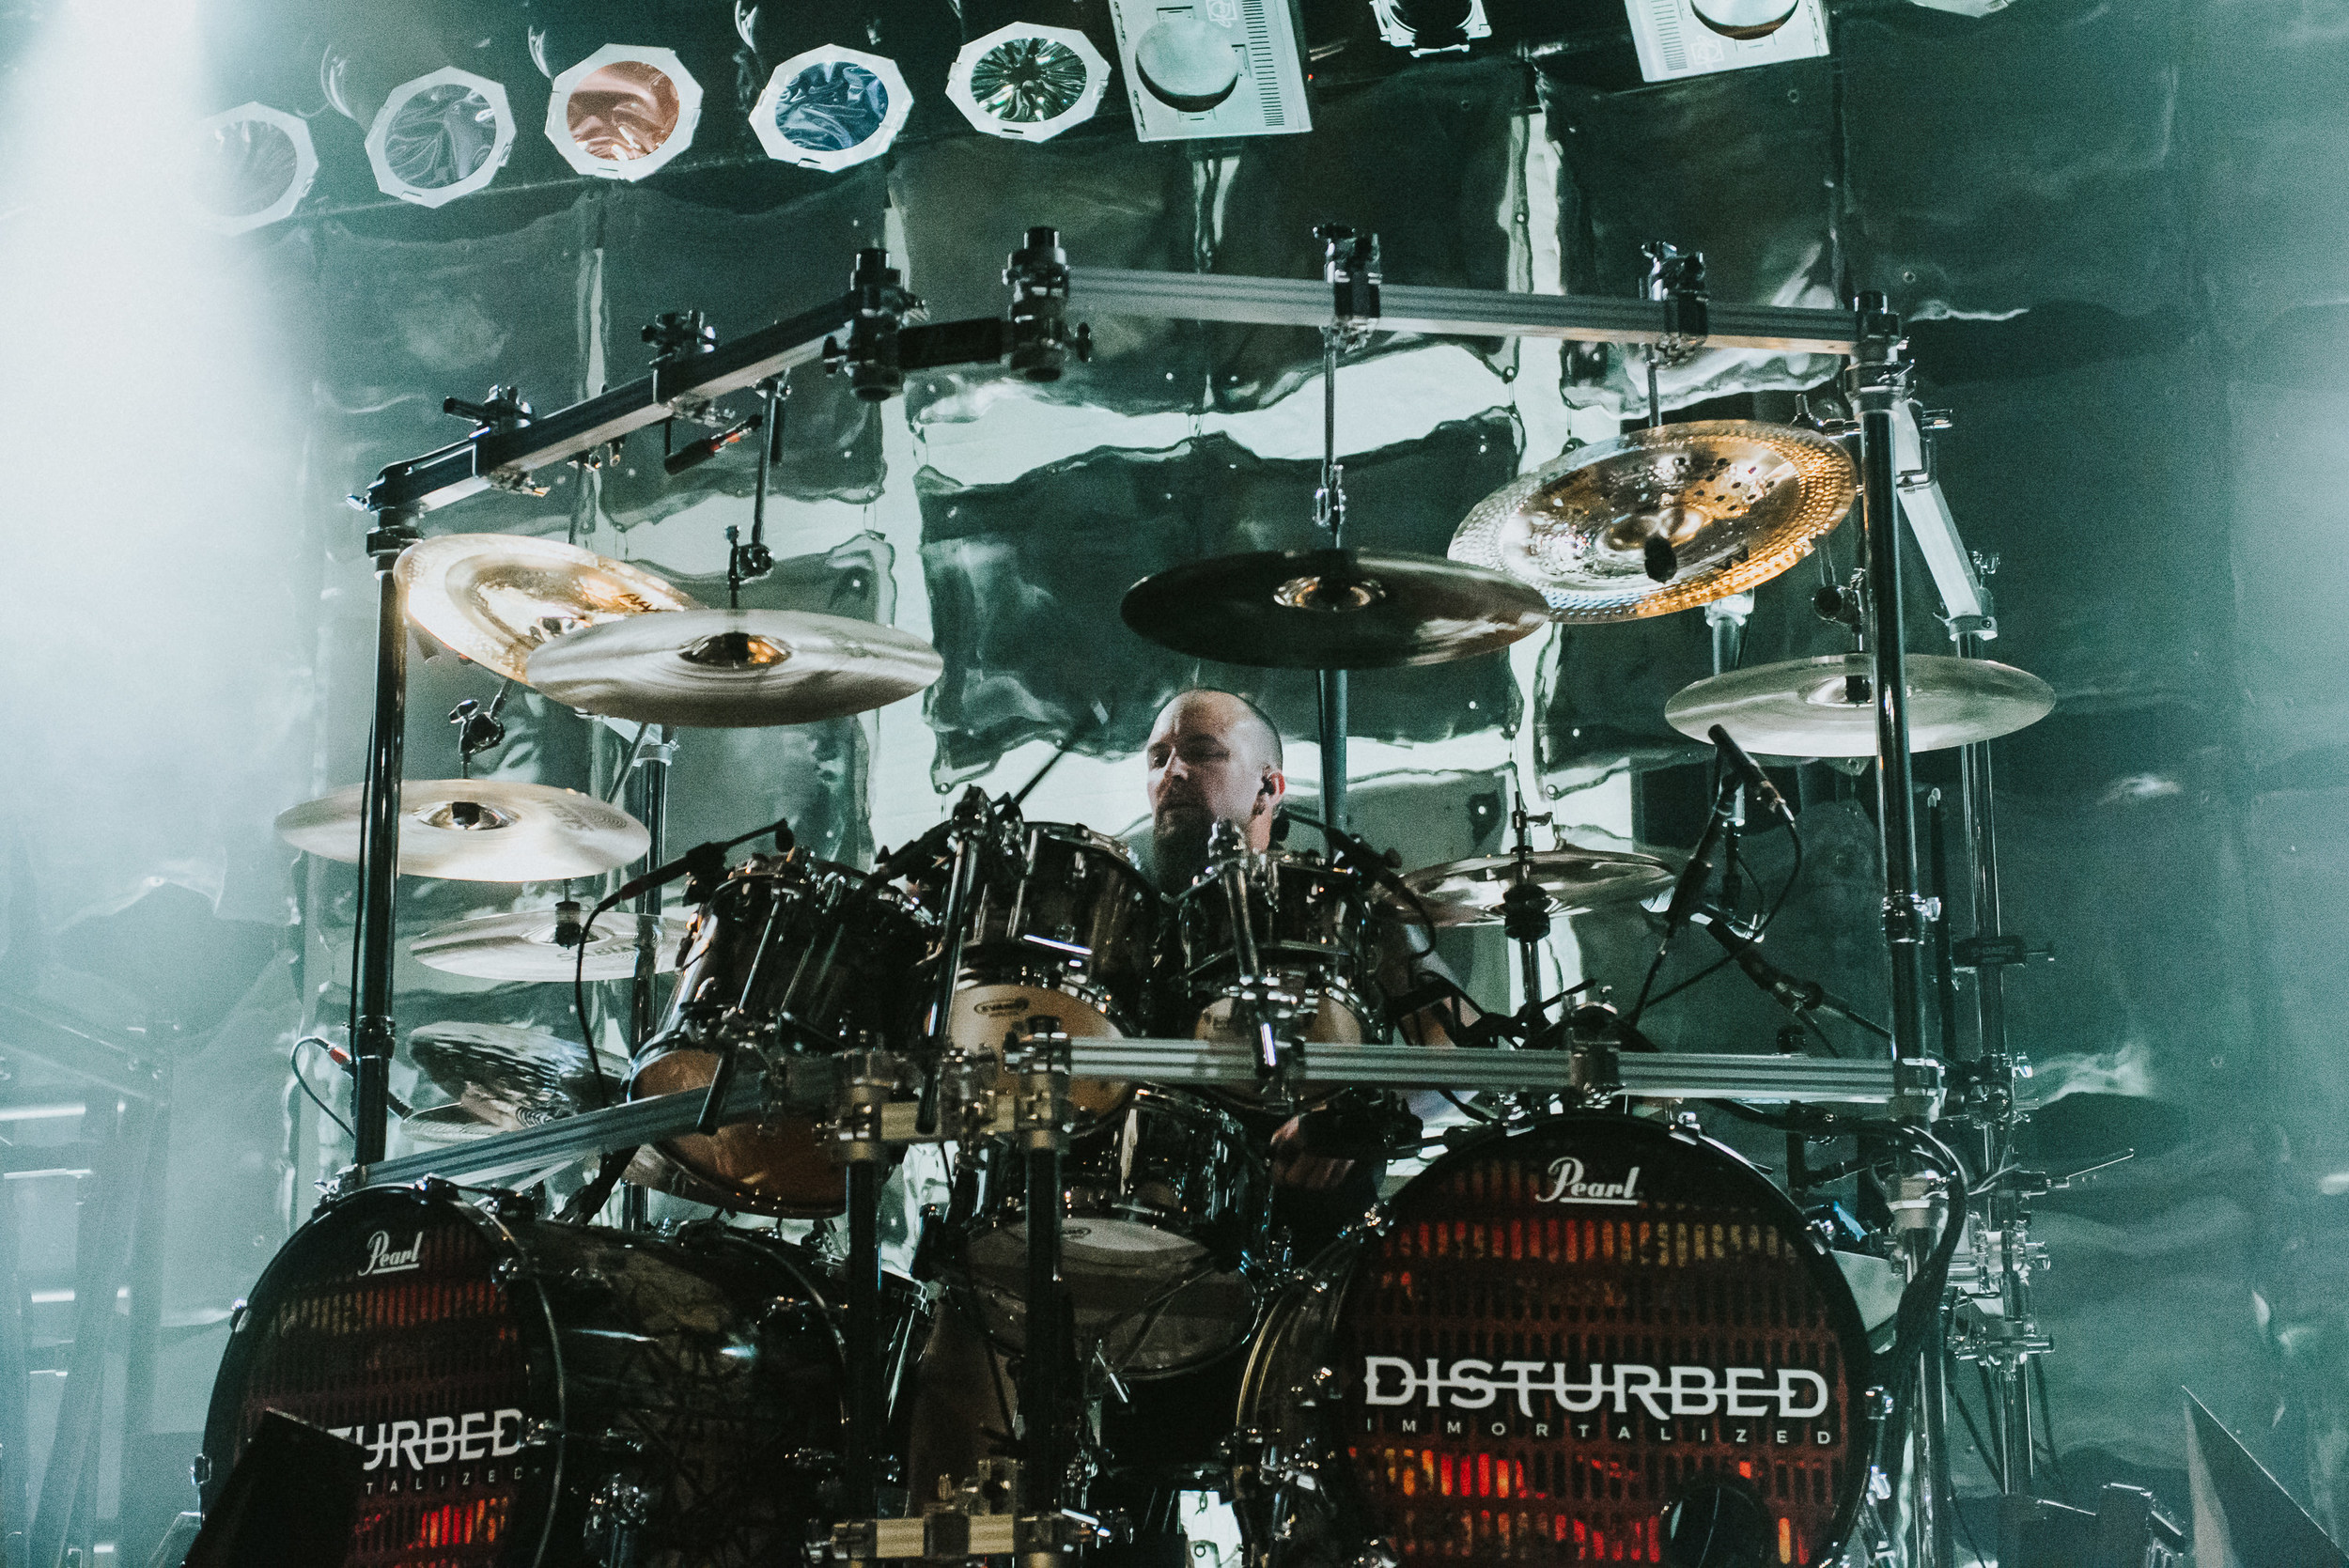 1_Disturbed_Commodore_Ballroom_Timothy-Nguyen_11March2016 (19 of 20).jpg